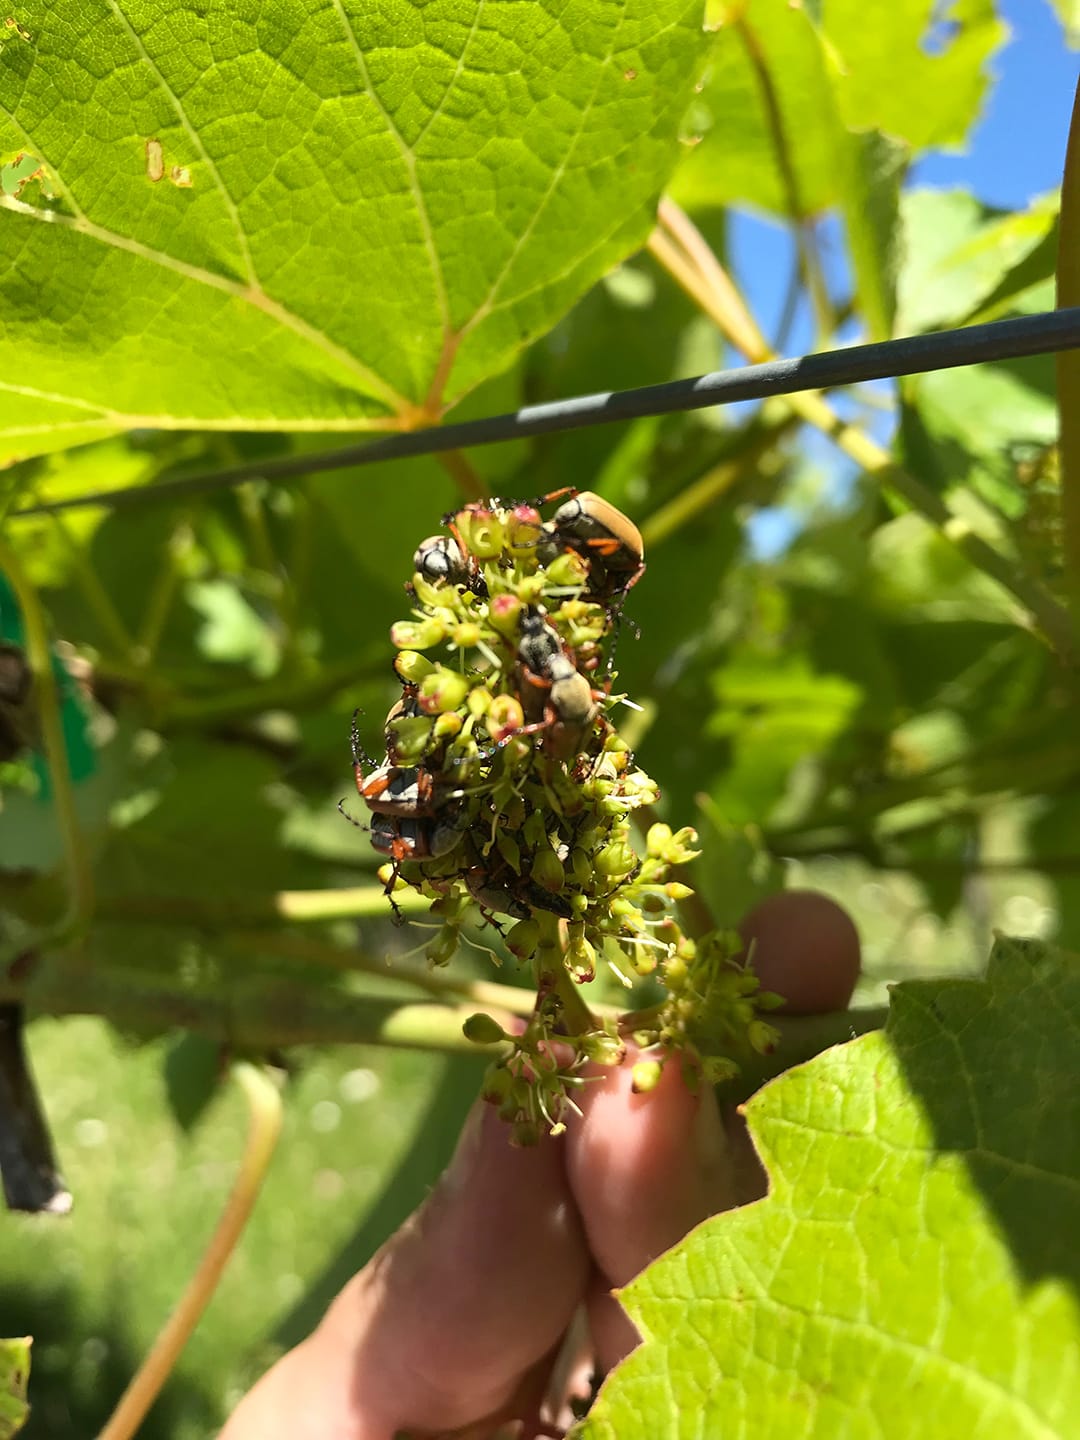 rose chafer beetles on a cluster of grapes